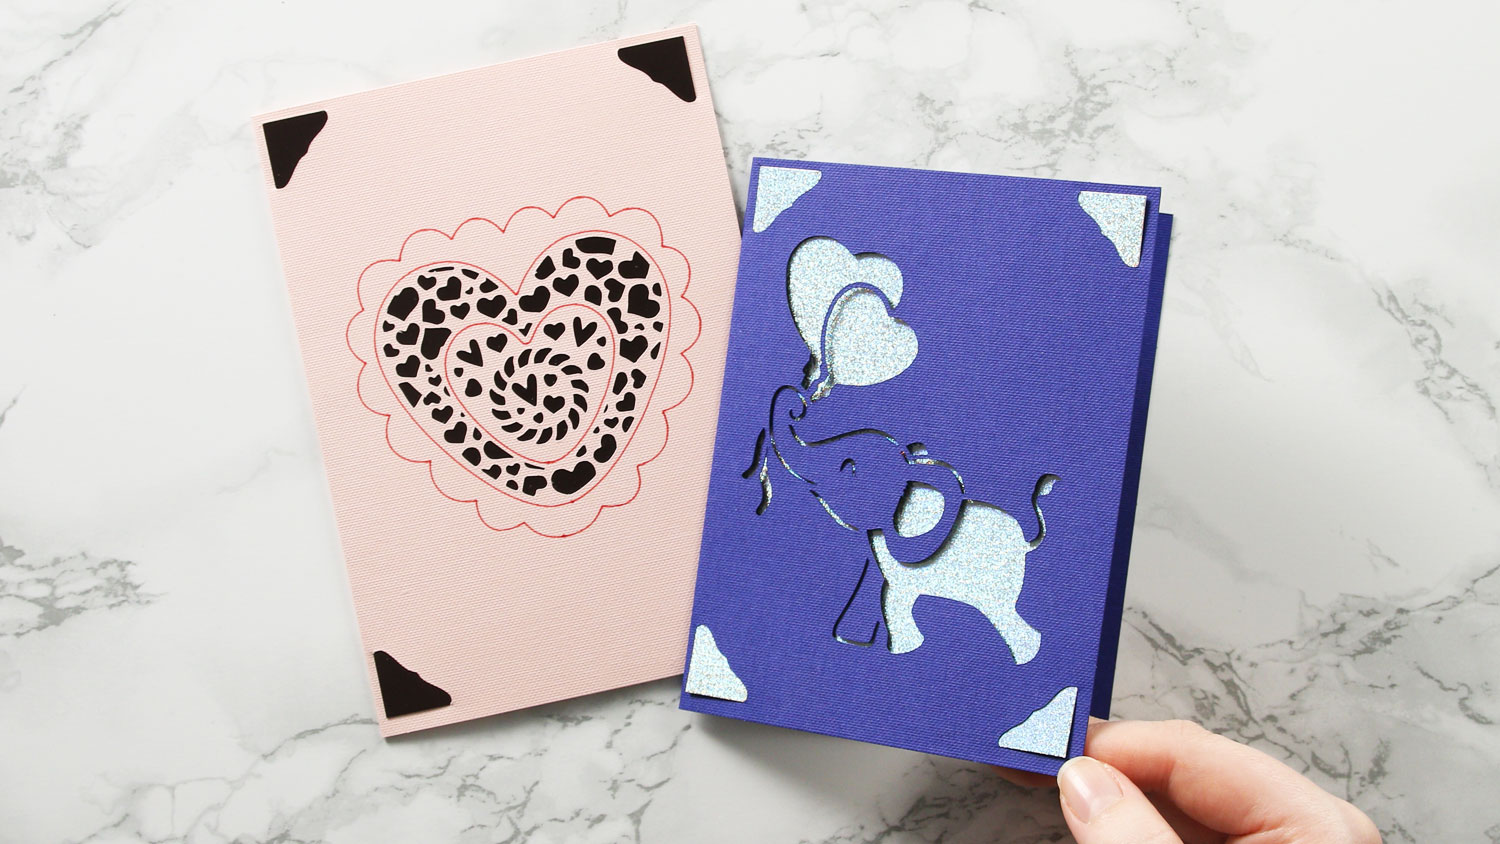 How To Make Your Own Card Designs For Cricut Joy - Tastefully Frugal